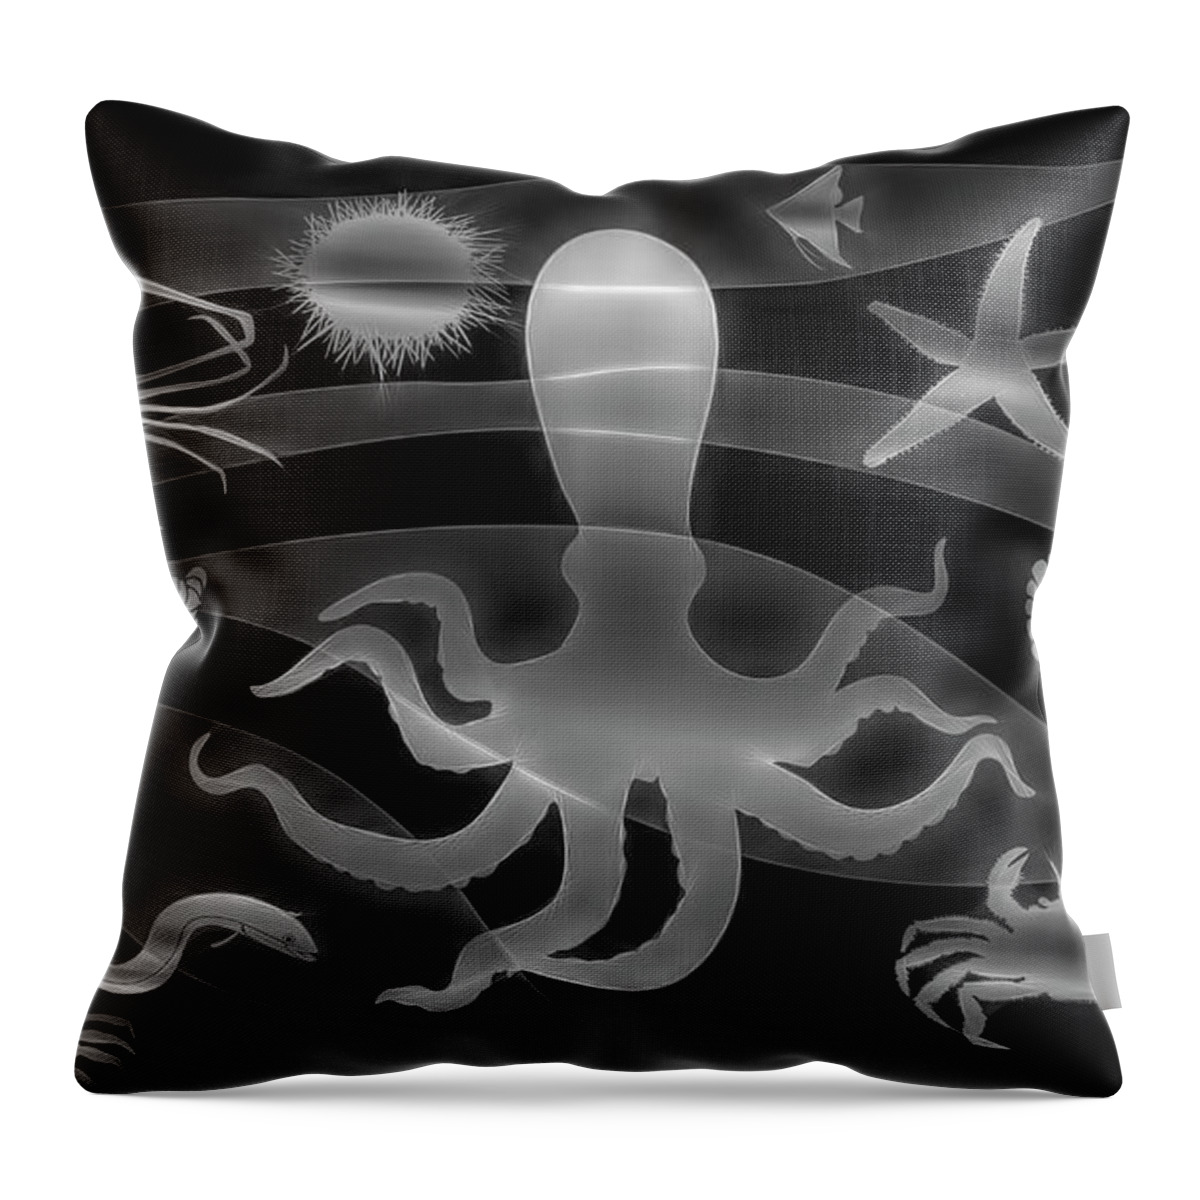 Abstracts Throw Pillow featuring the digital art Under the Sea Artwork in Black and White by Debra and Dave Vanderlaan